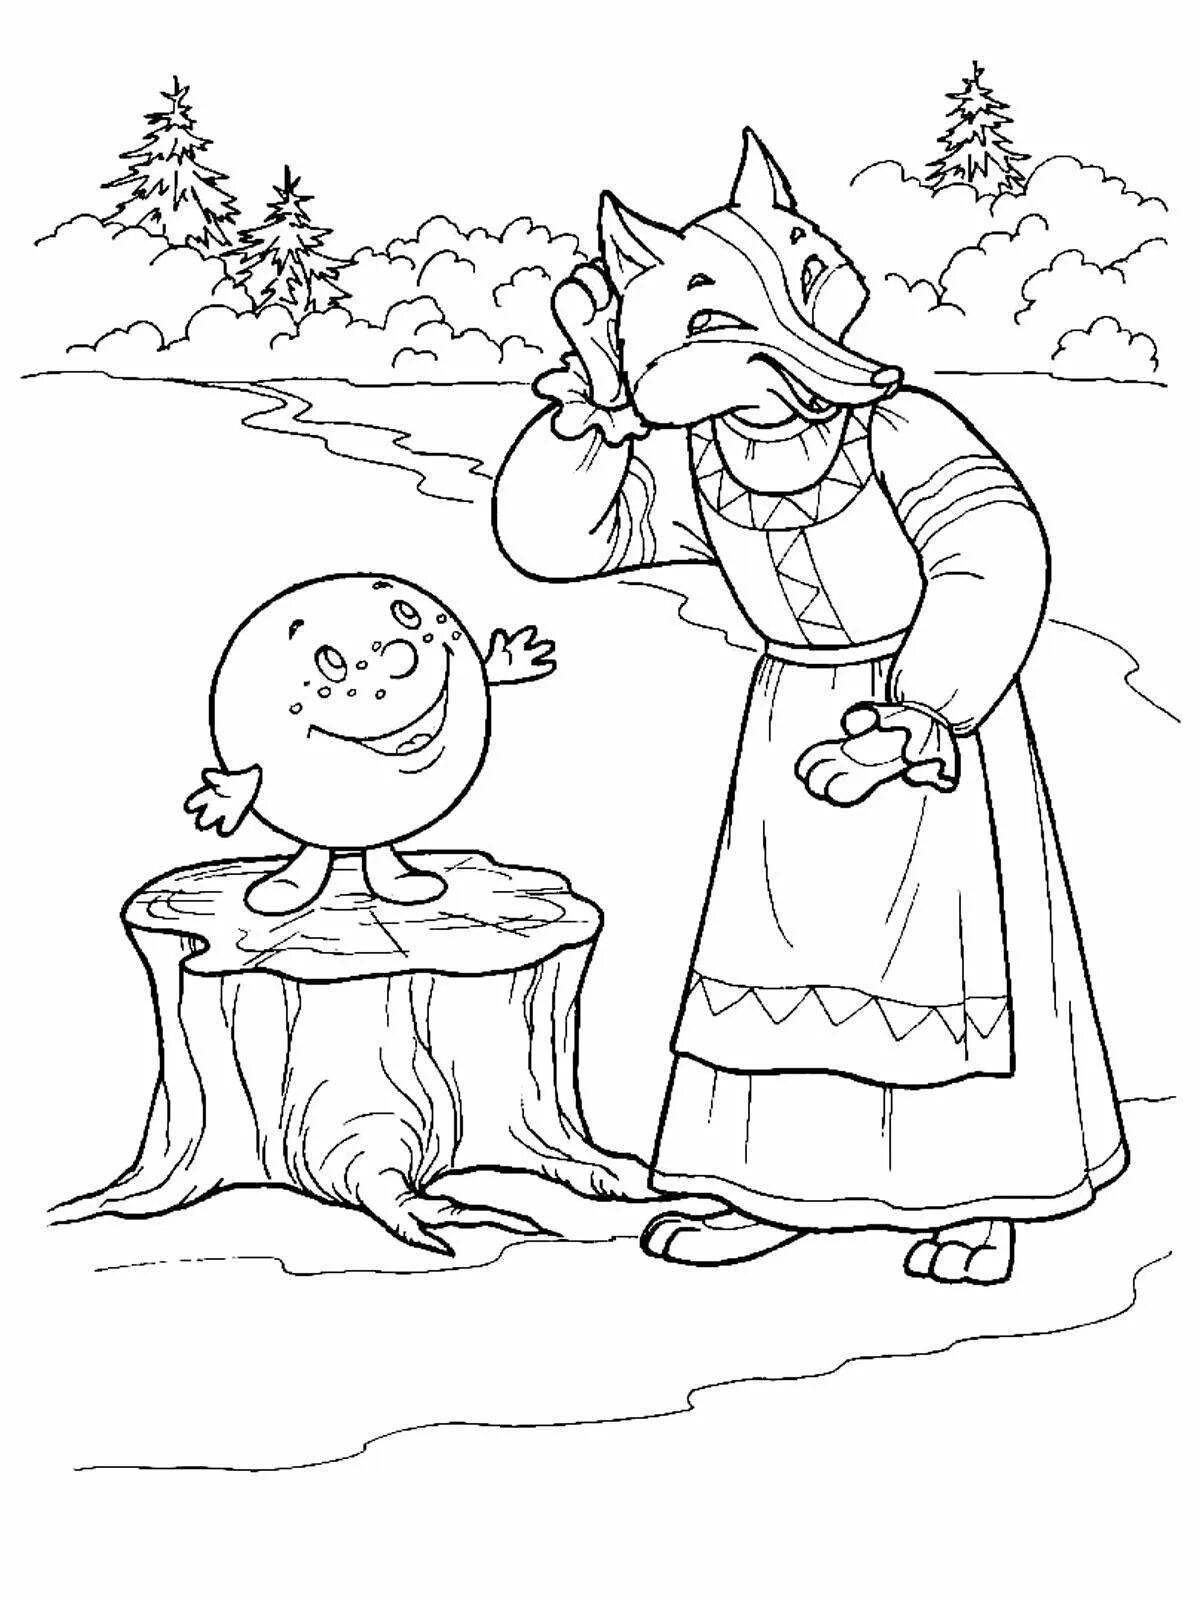 Intricate coloring page fairy tale illustration